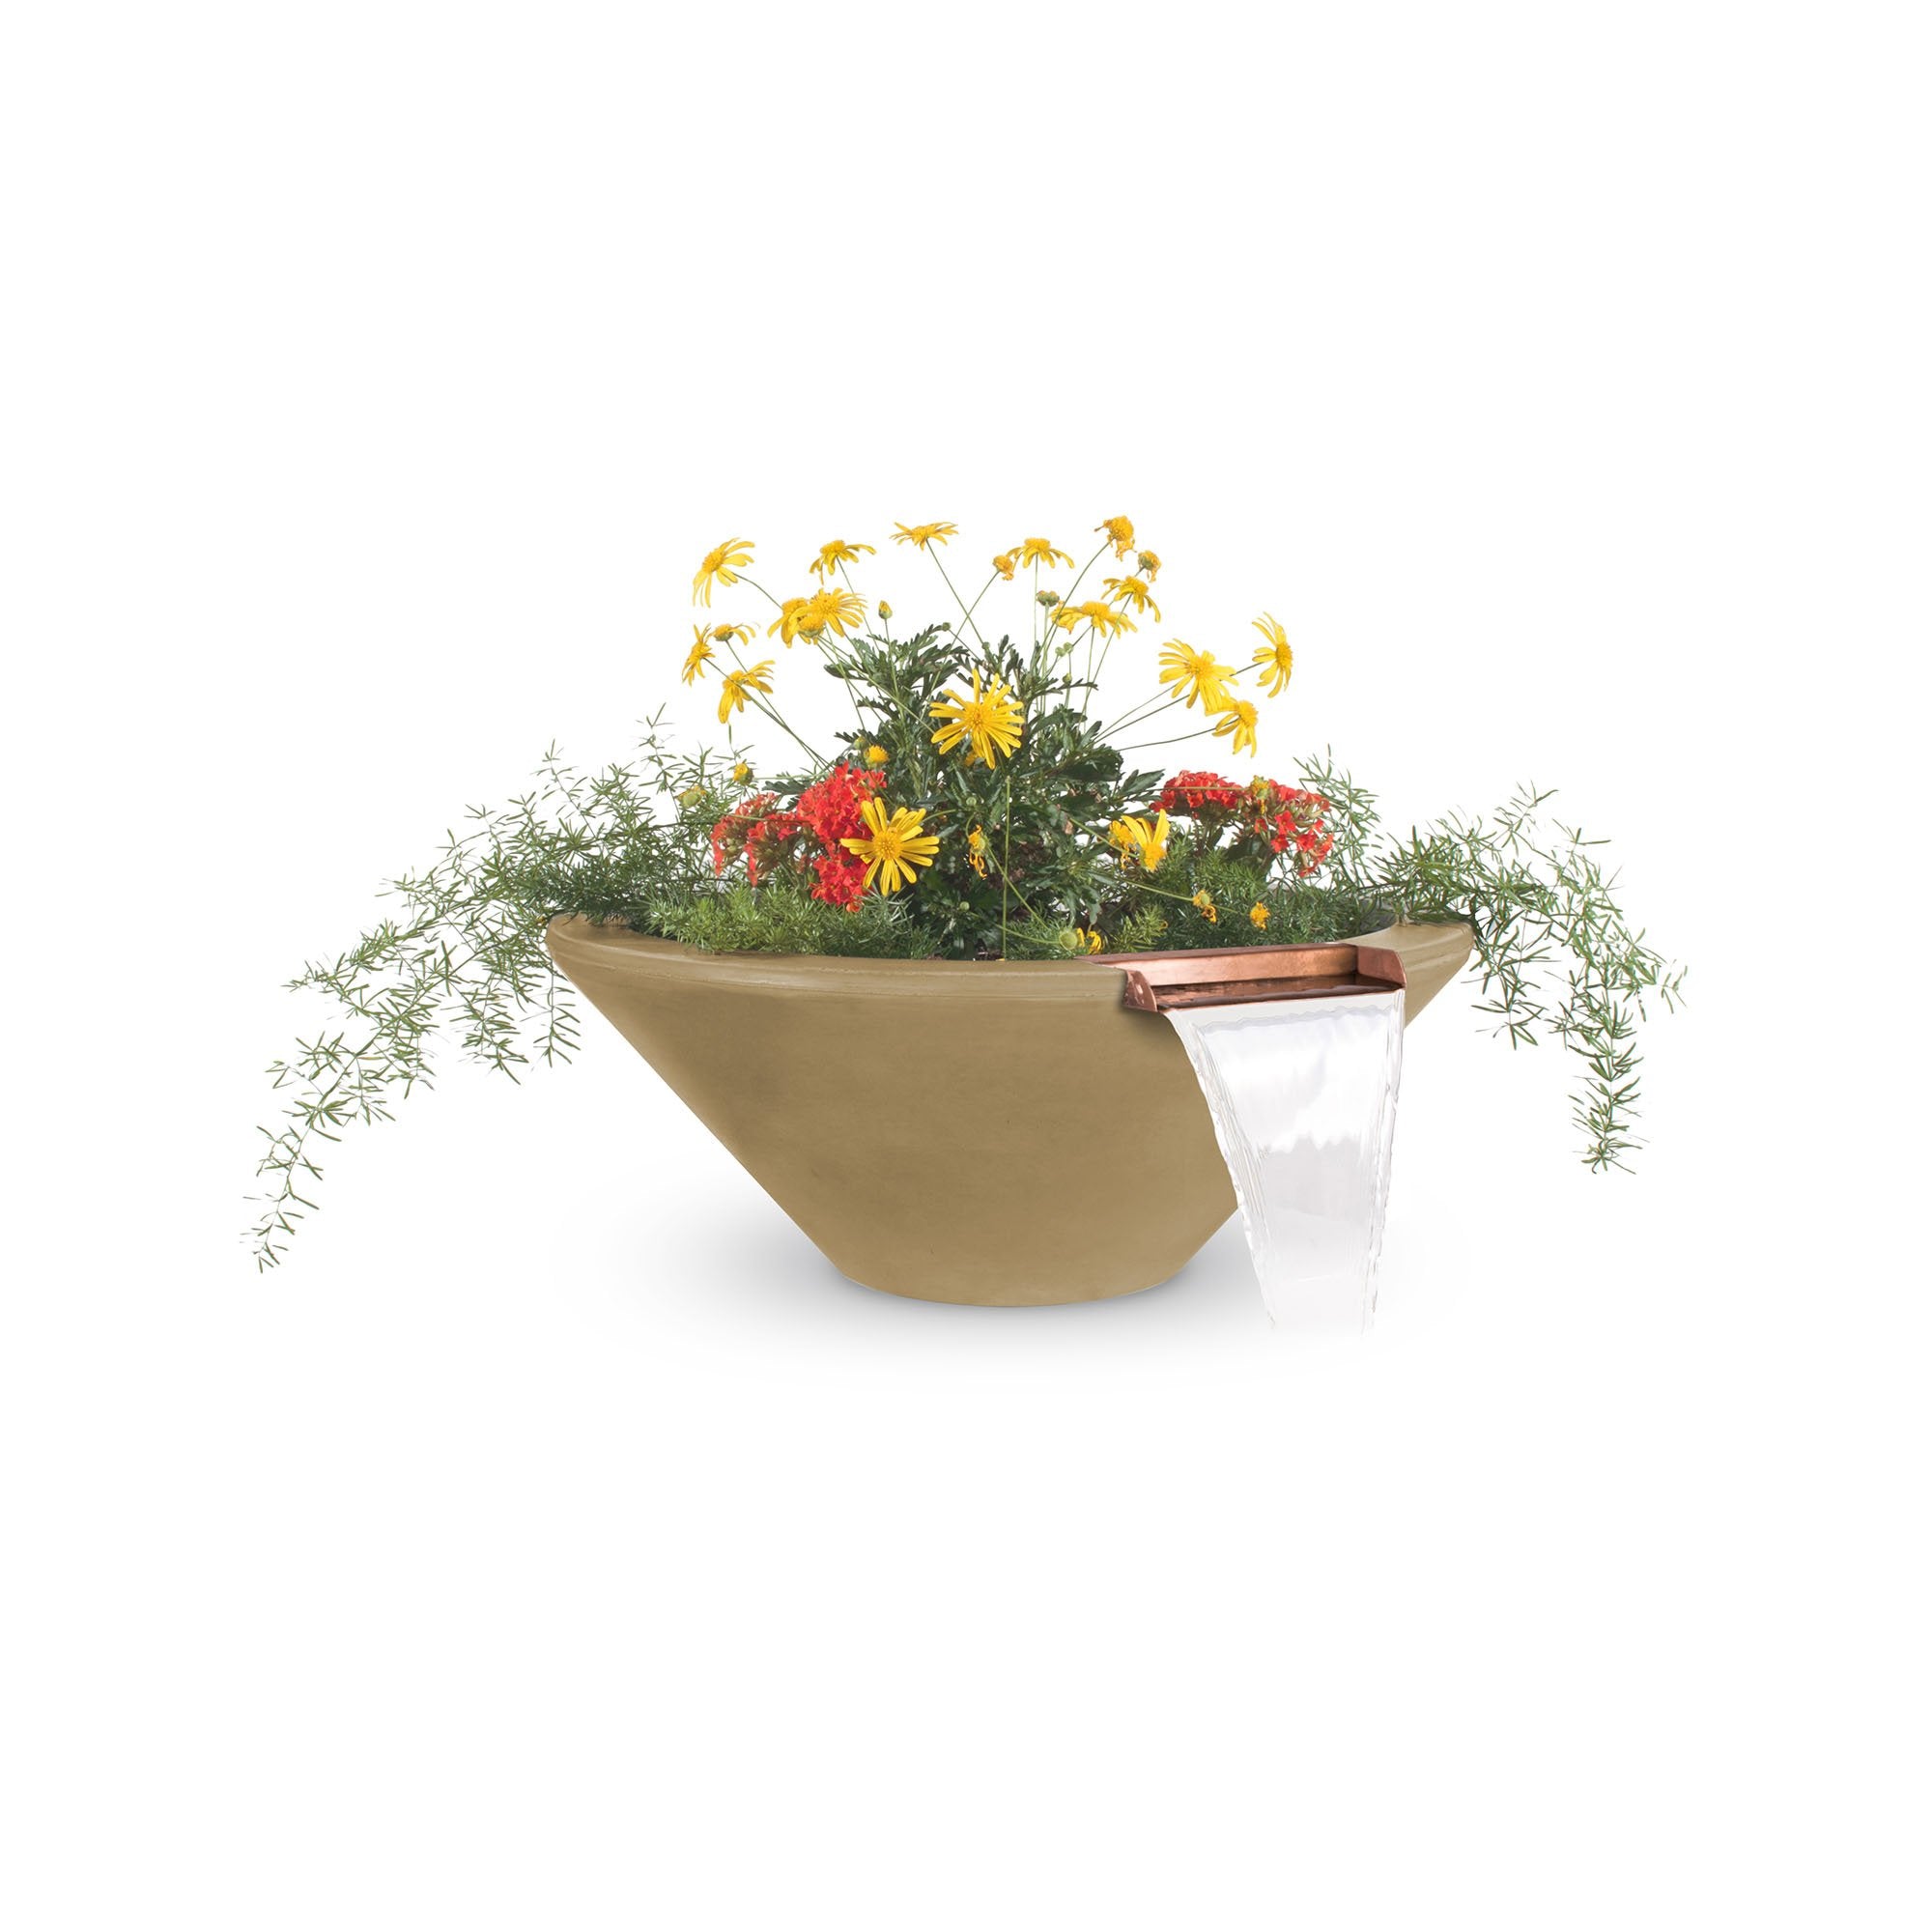 TOP Fires Cazo Planter & Water Bowl in GFRC Concrete by The Outdoor Plus - Majestic Fountains